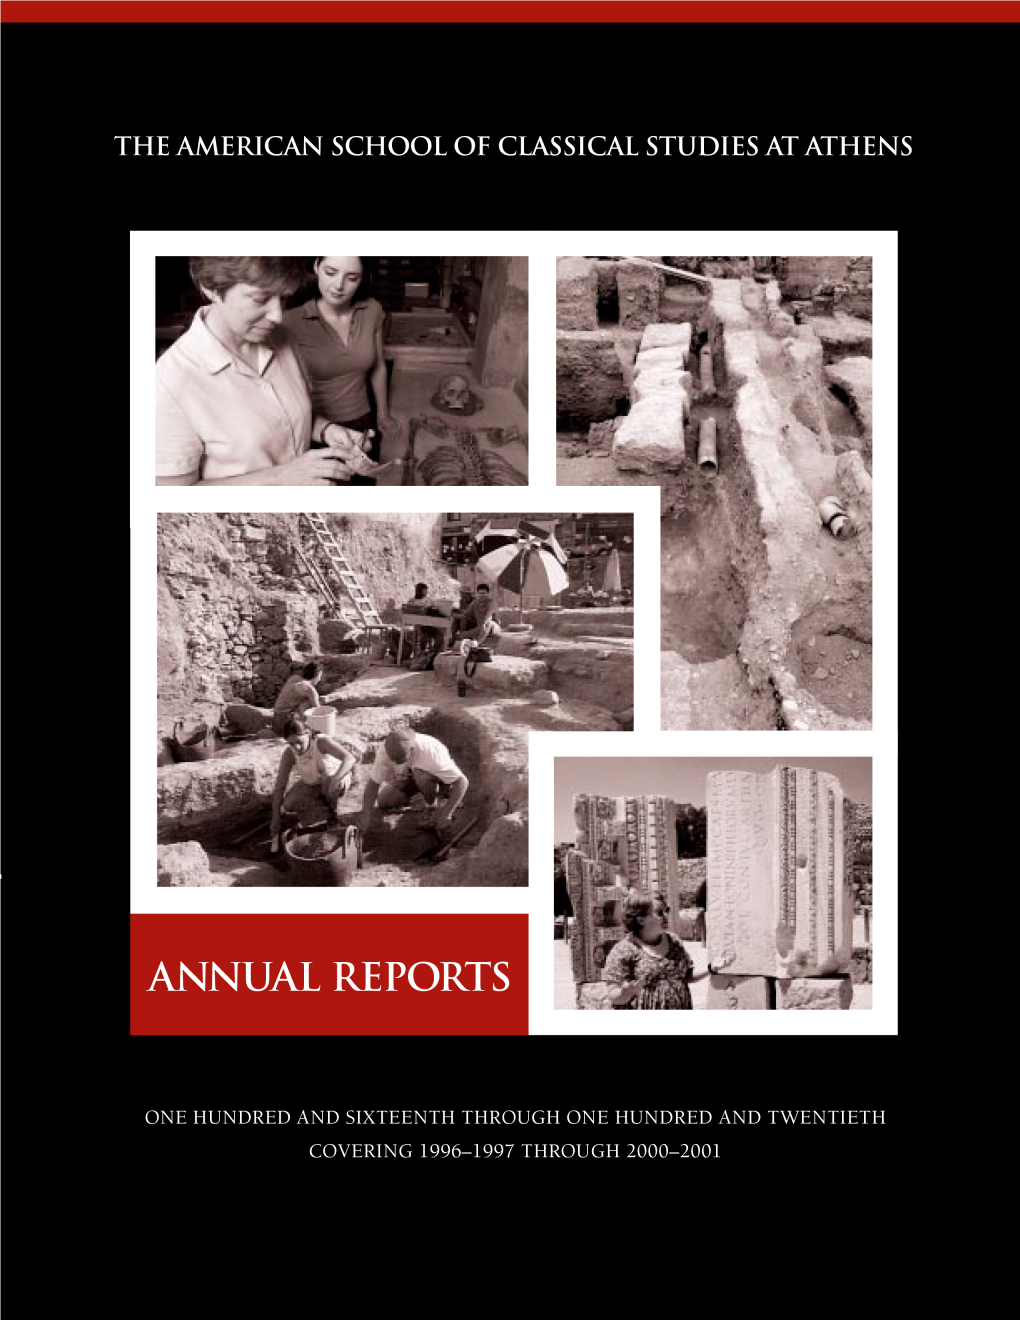 The American School of Classical Studies at Athens One Hundred and Sixteenth Through One Hundred and Twentieth Annual Reports 1996–1997 Through 2000–2001